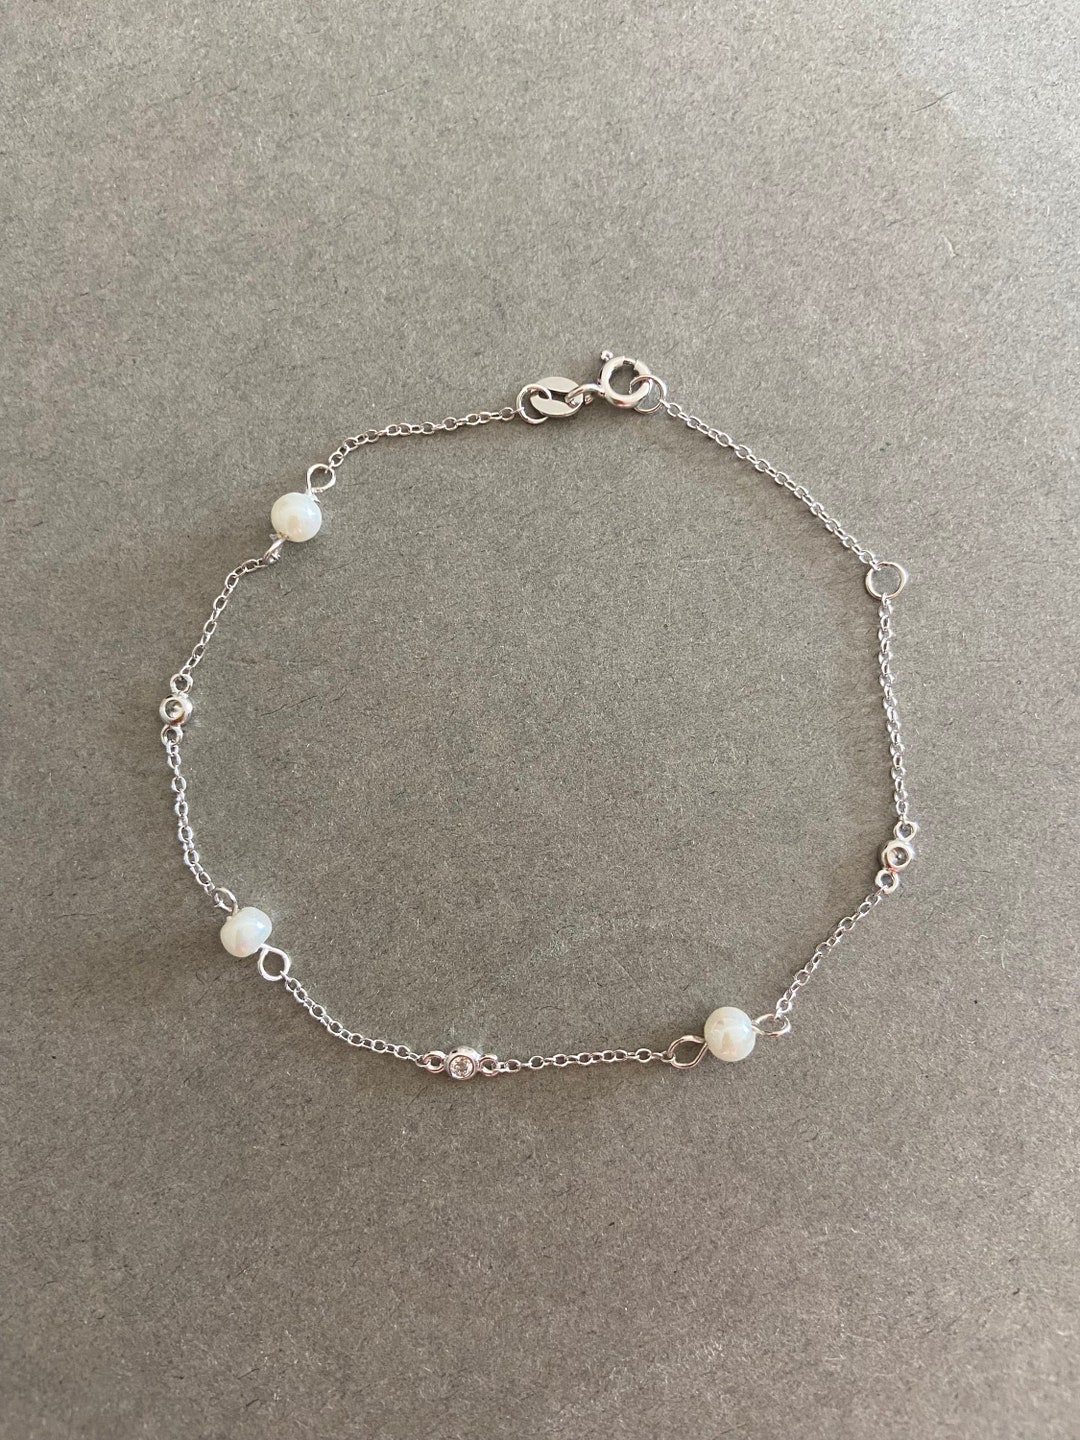 Silver Tiny Pearl Chain Bracelet sterling Silver - Etsy